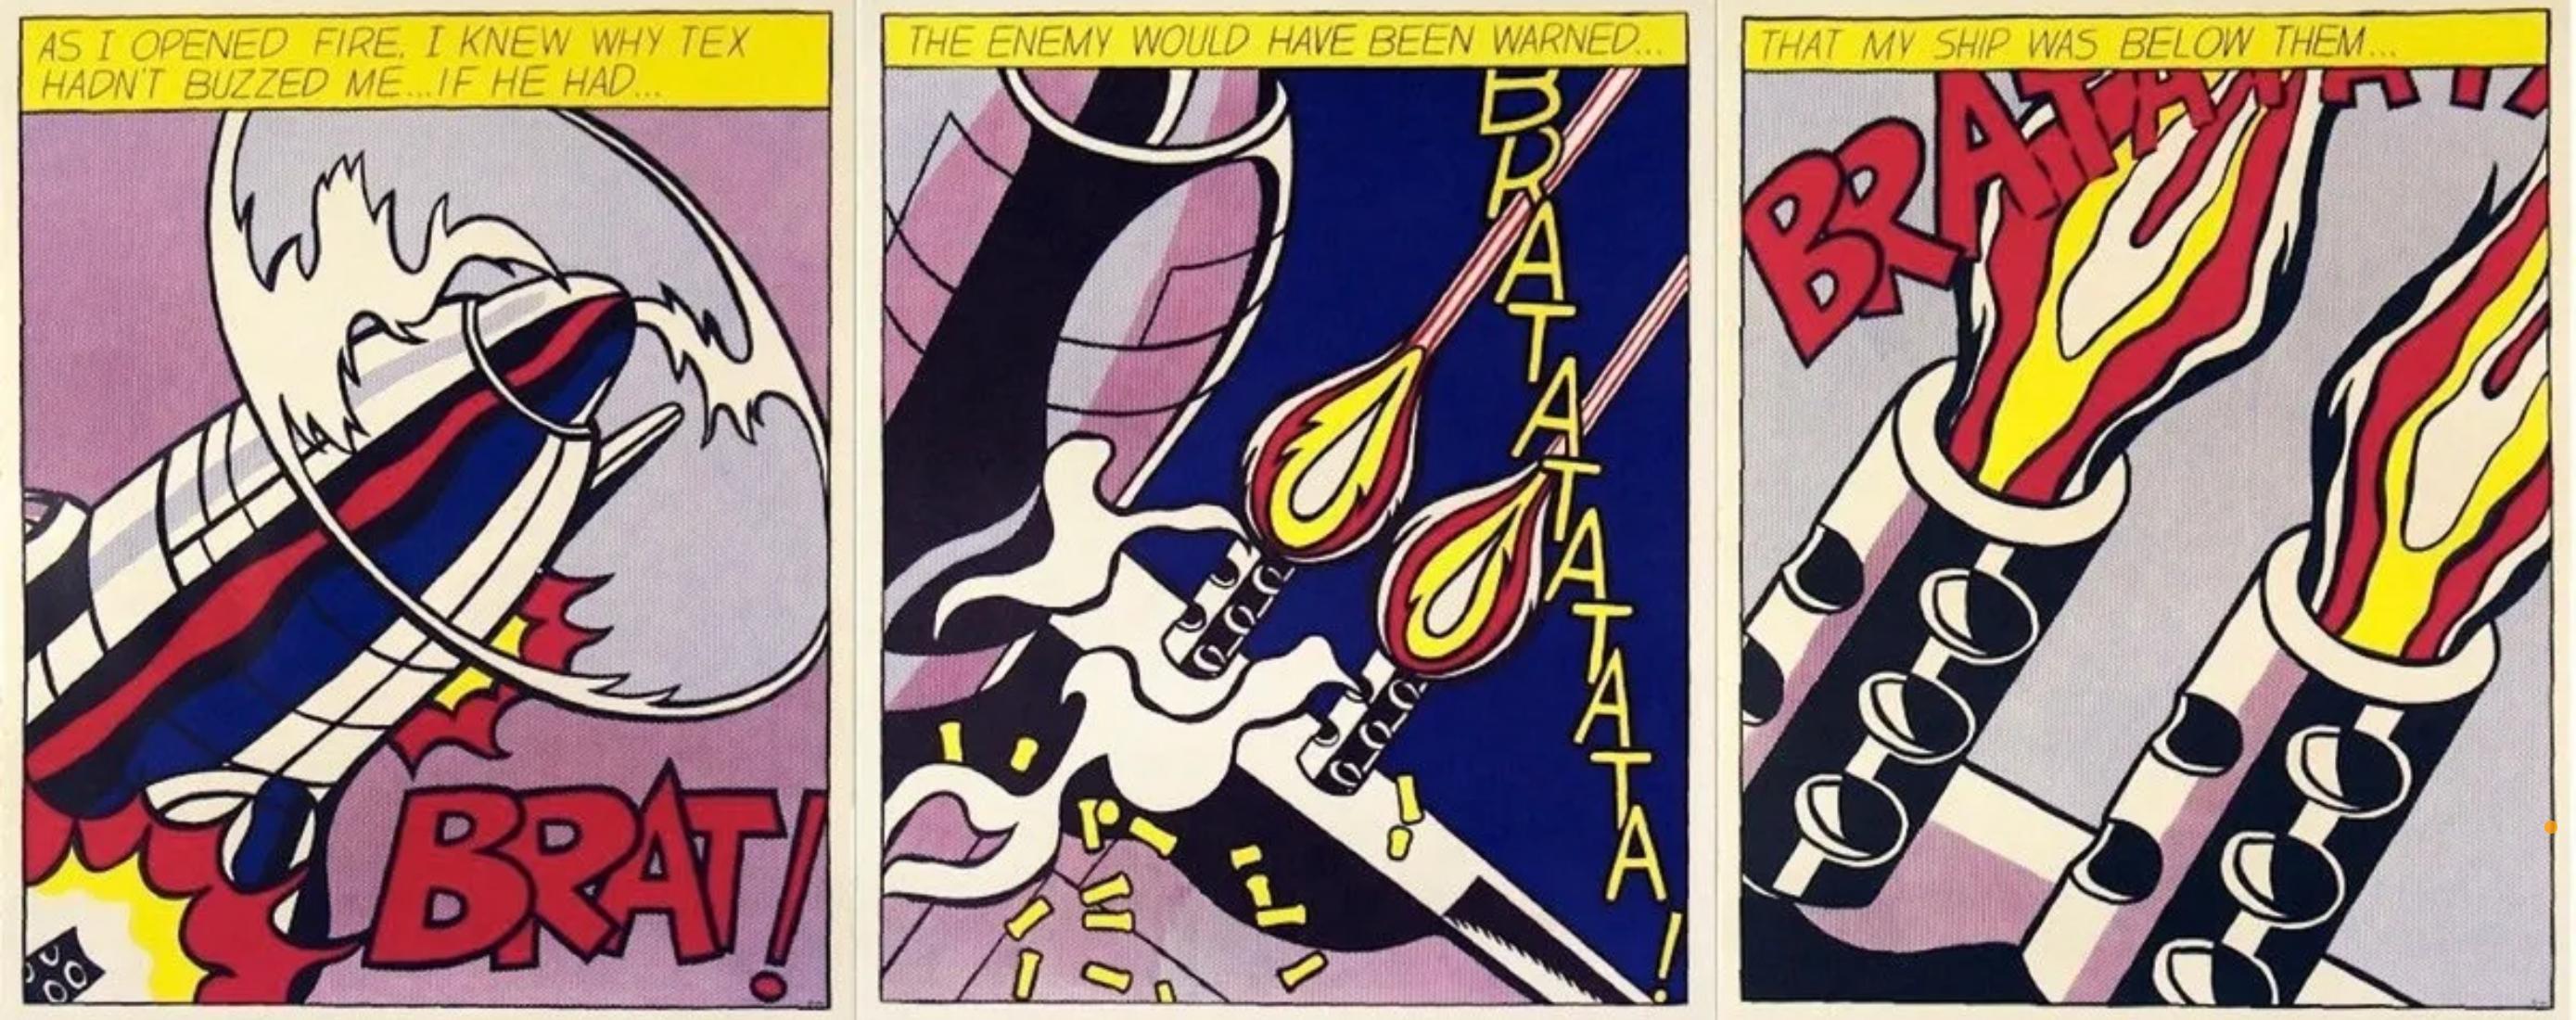 ROY LICHTENSTEIN (1923-97) An American painter, print-maker and decorative artist who achieved fame in the 1960s. His paintings, based on motifs and procedures of comic strips and advertisements established him as one of the central figures of